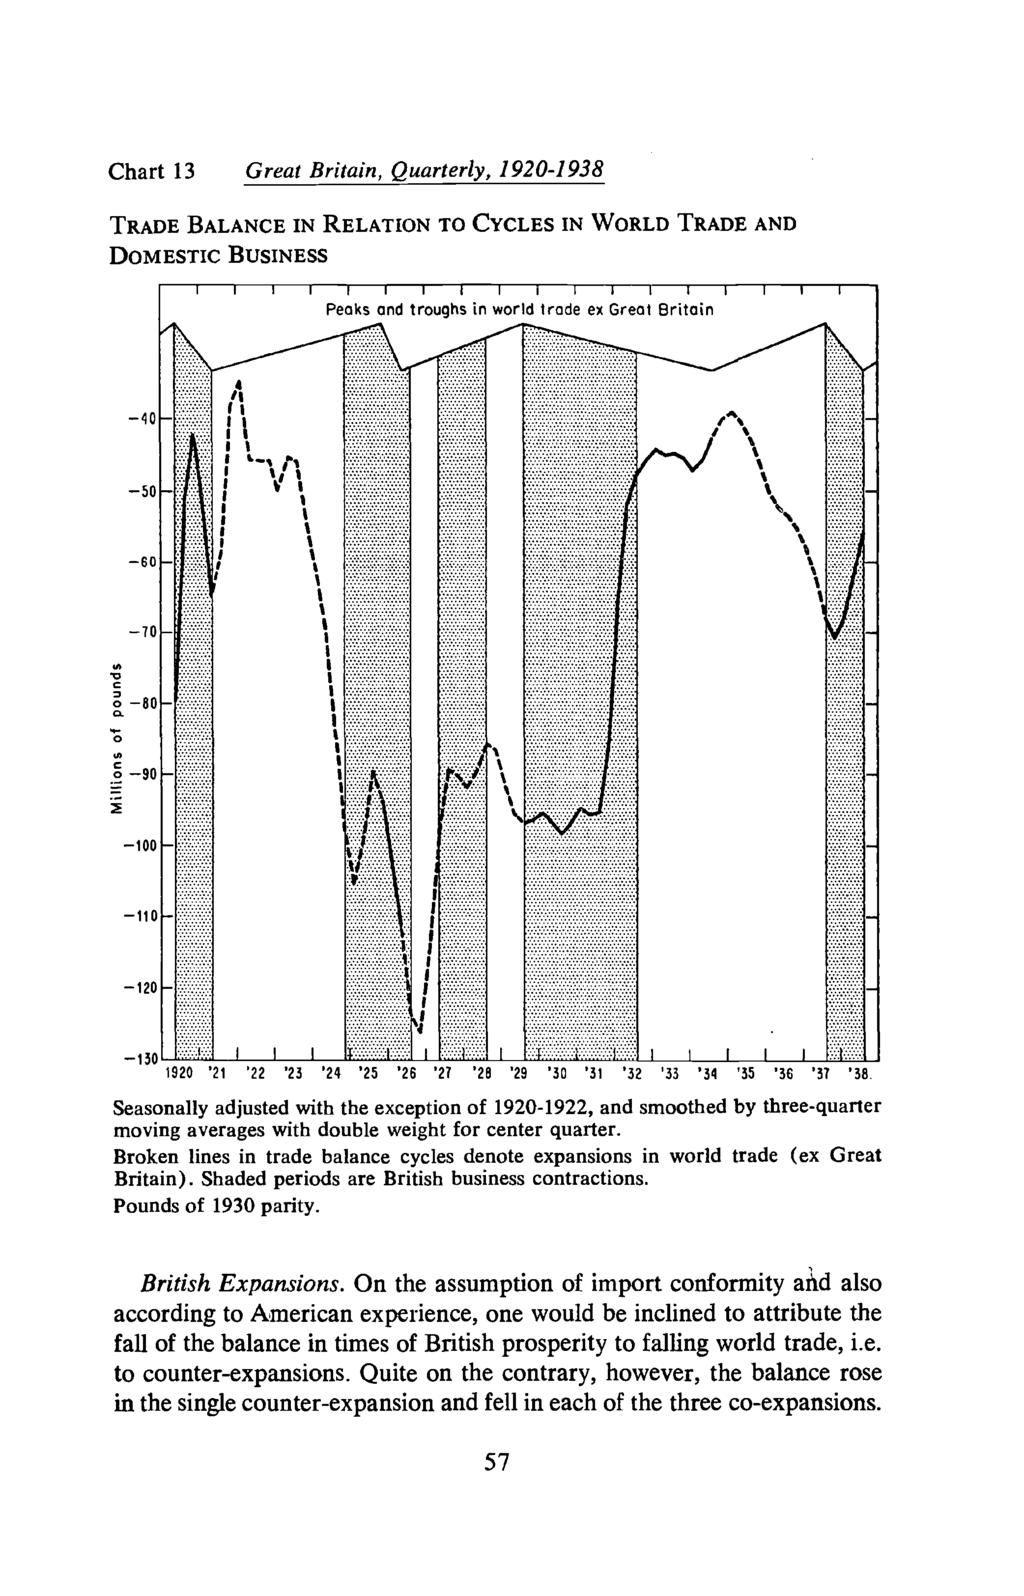 Chart 13 Great Britain, Quarterly, 1920-1 938 TRADE BALANCE IN RELATION TO CYCLES IN WORLD TRADE AND DOMESTIC BUSINESS Is C 0 0 0 1920 '21 22 '23 24 '25 '26 '27 '28 '29 '30 '31 '32 '33 '34 '35 '36